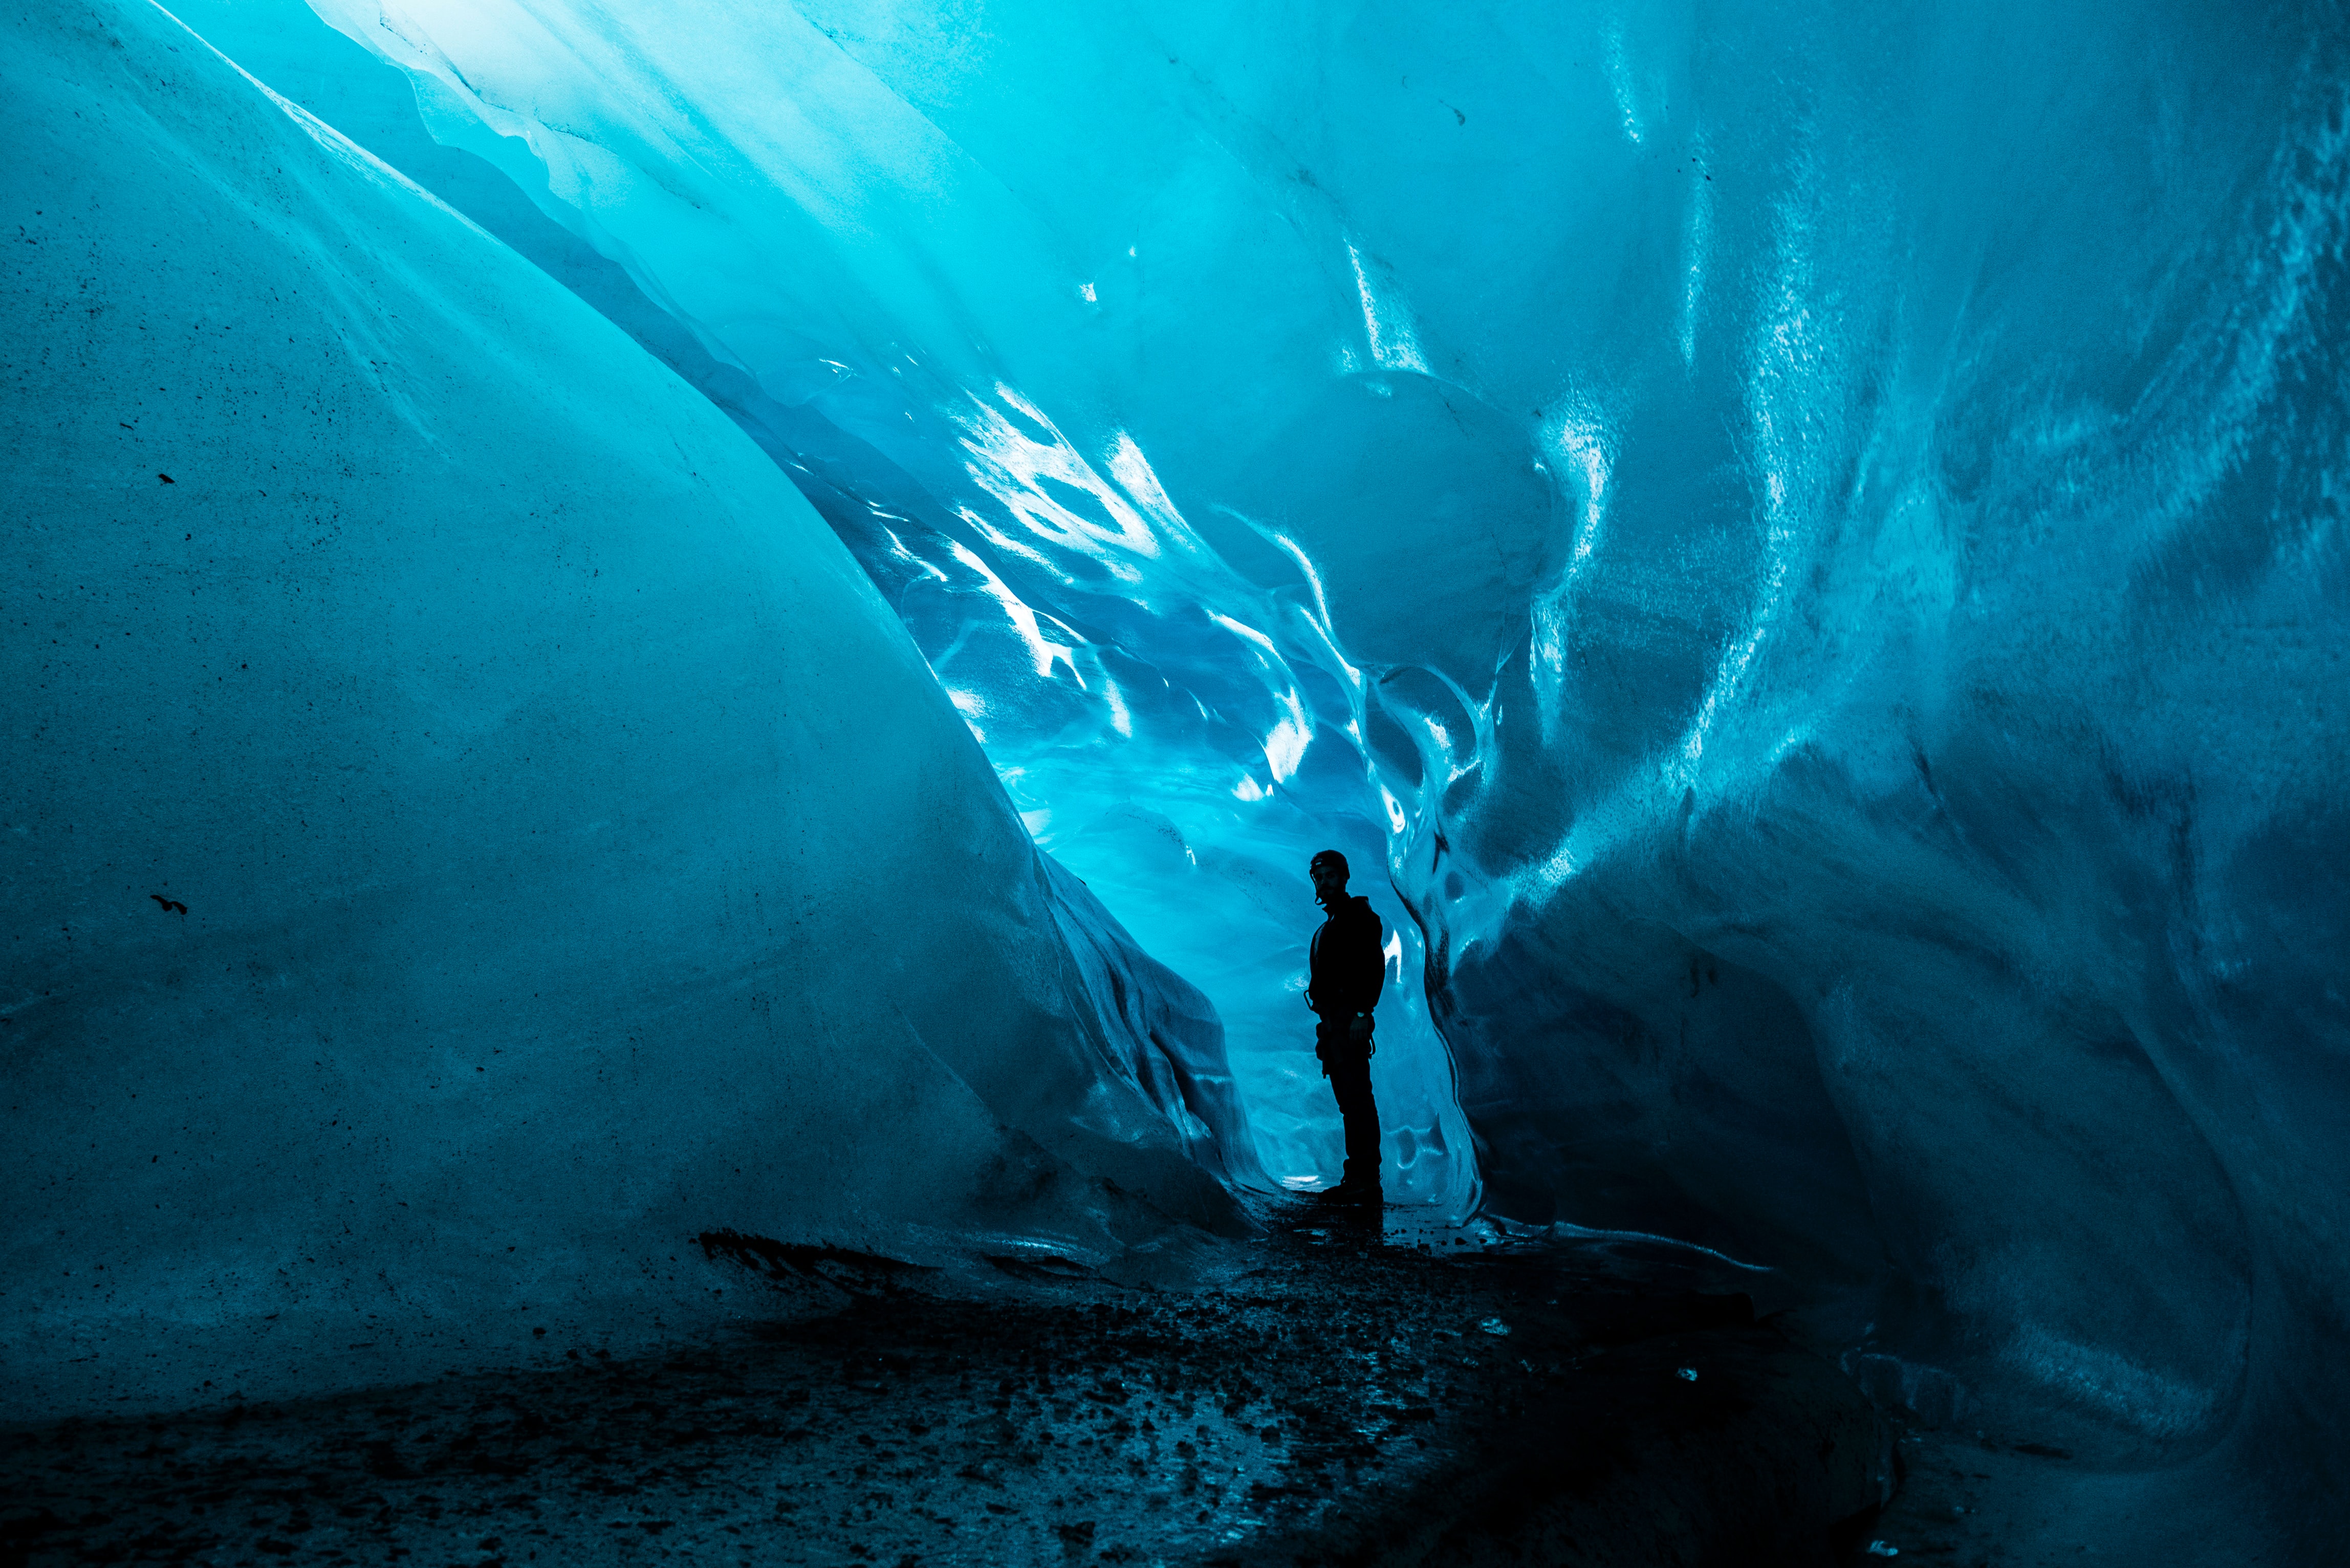 Ice Cave, Iceland during winter